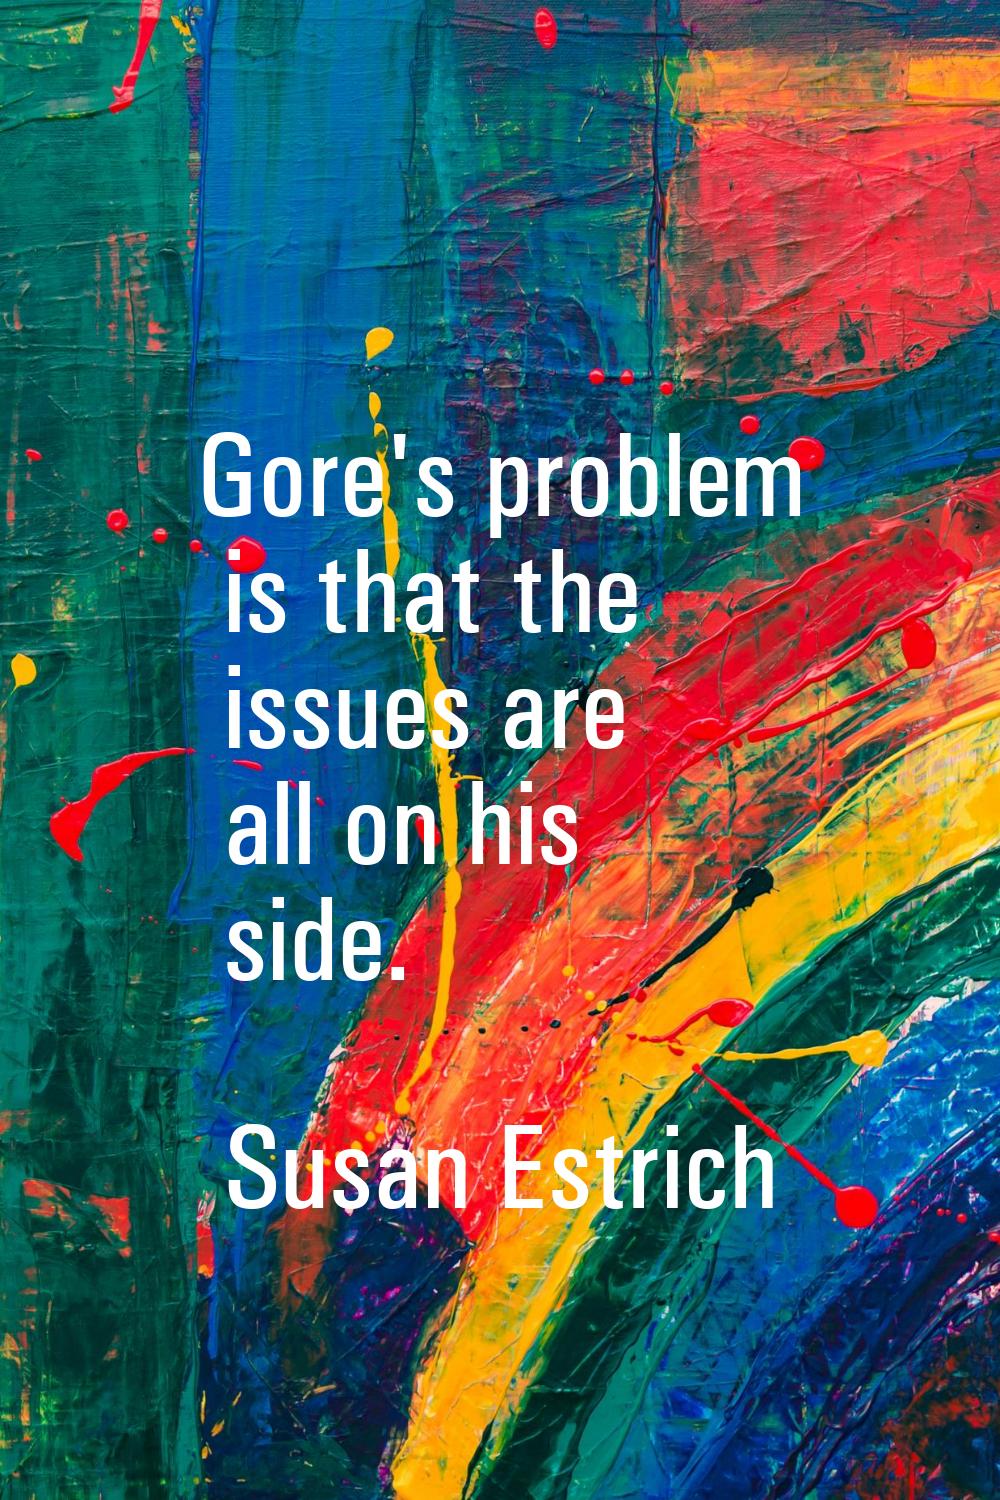 Gore's problem is that the issues are all on his side.